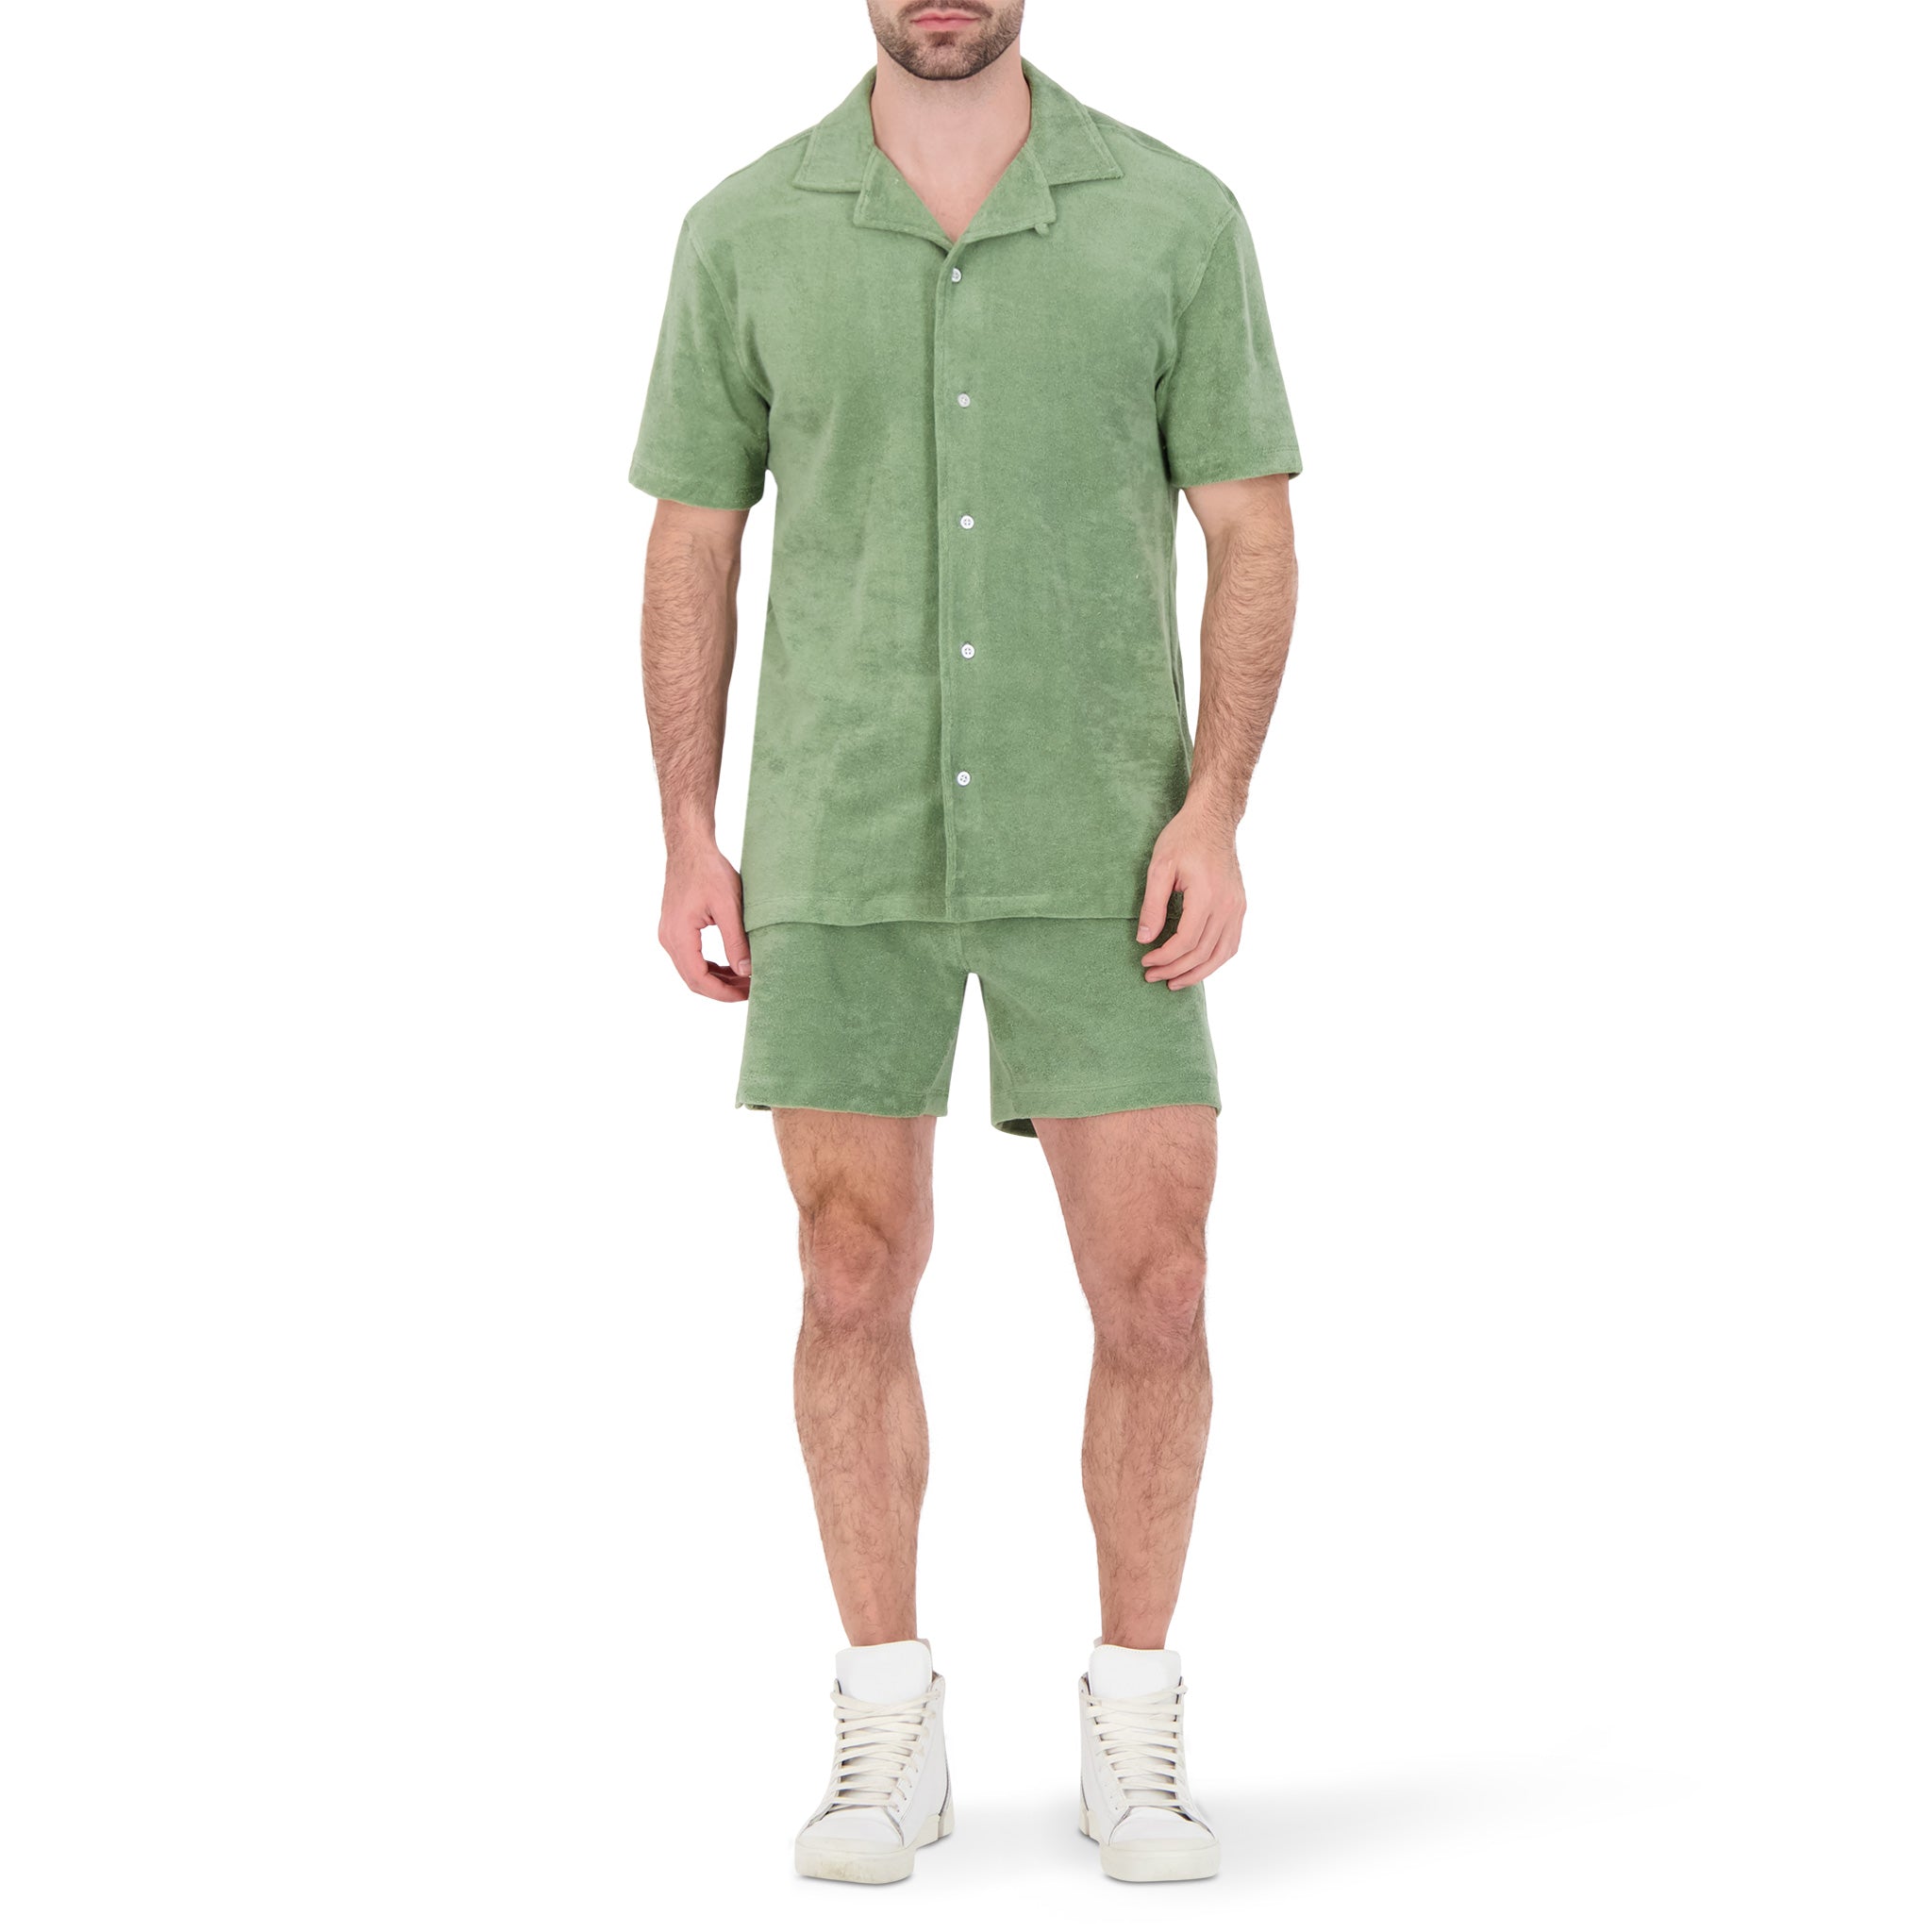 Terry Cloth Camp Shirt in Olive Green